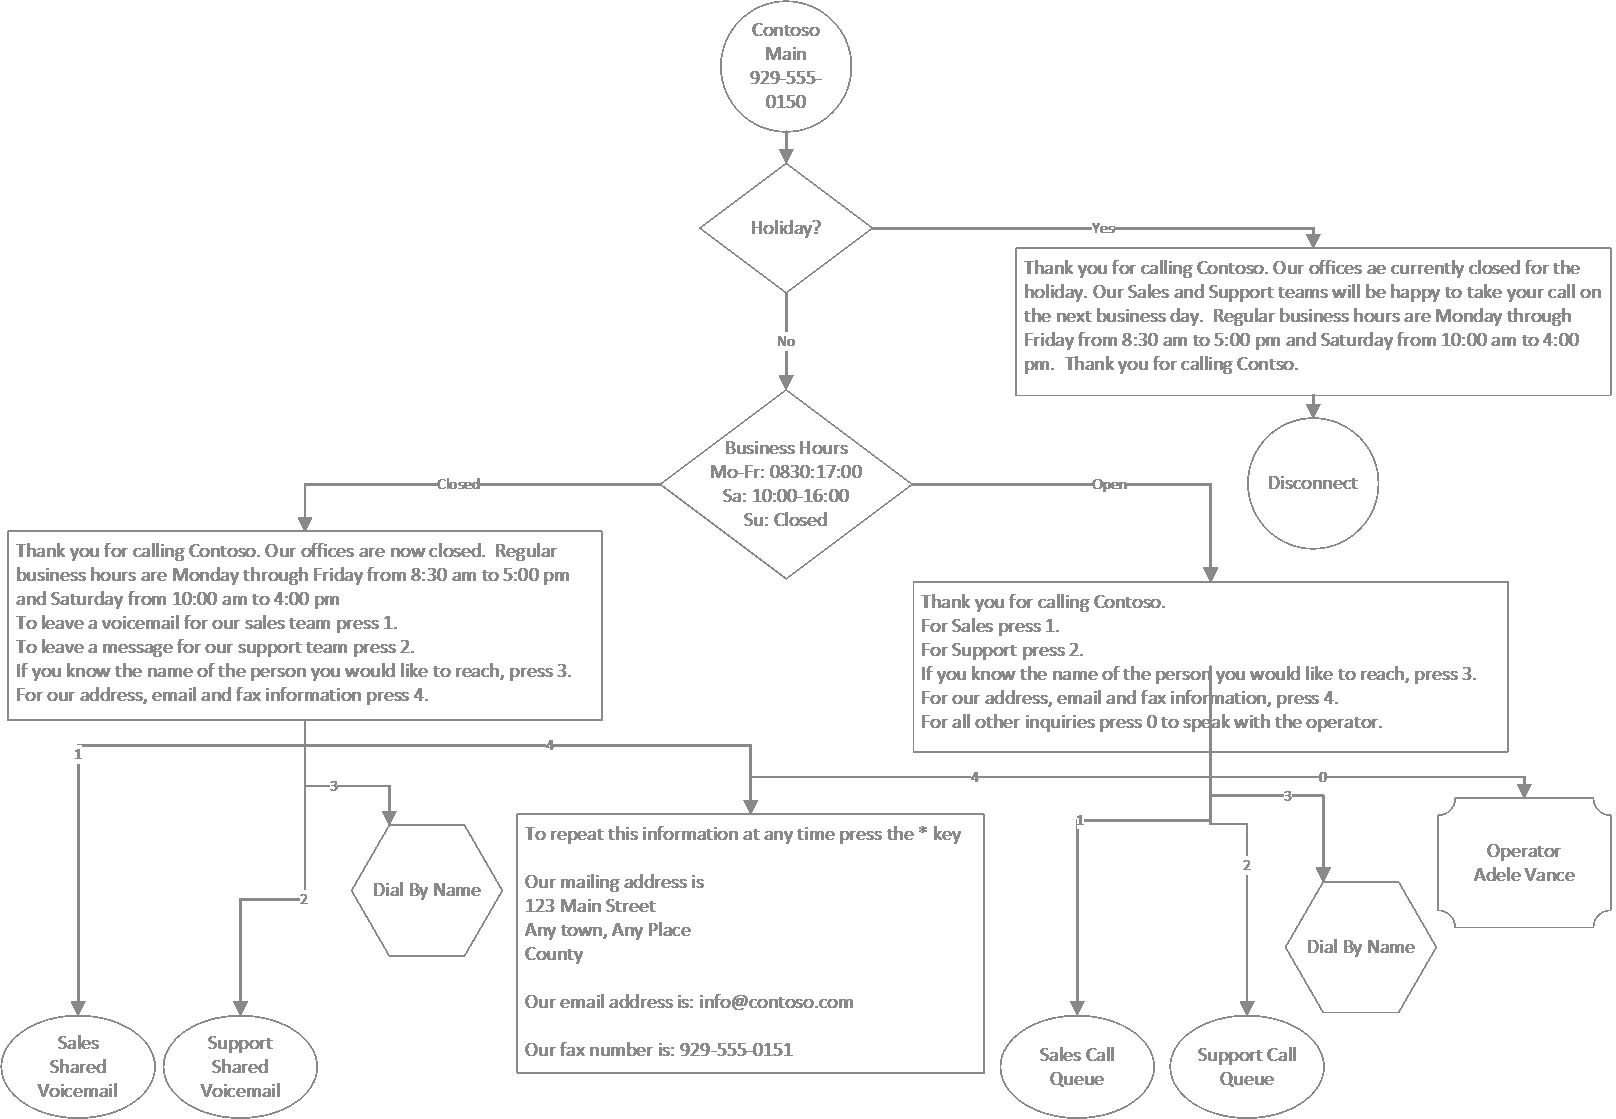 Diagram of Auto Attendant call flow being built with cmdlets.